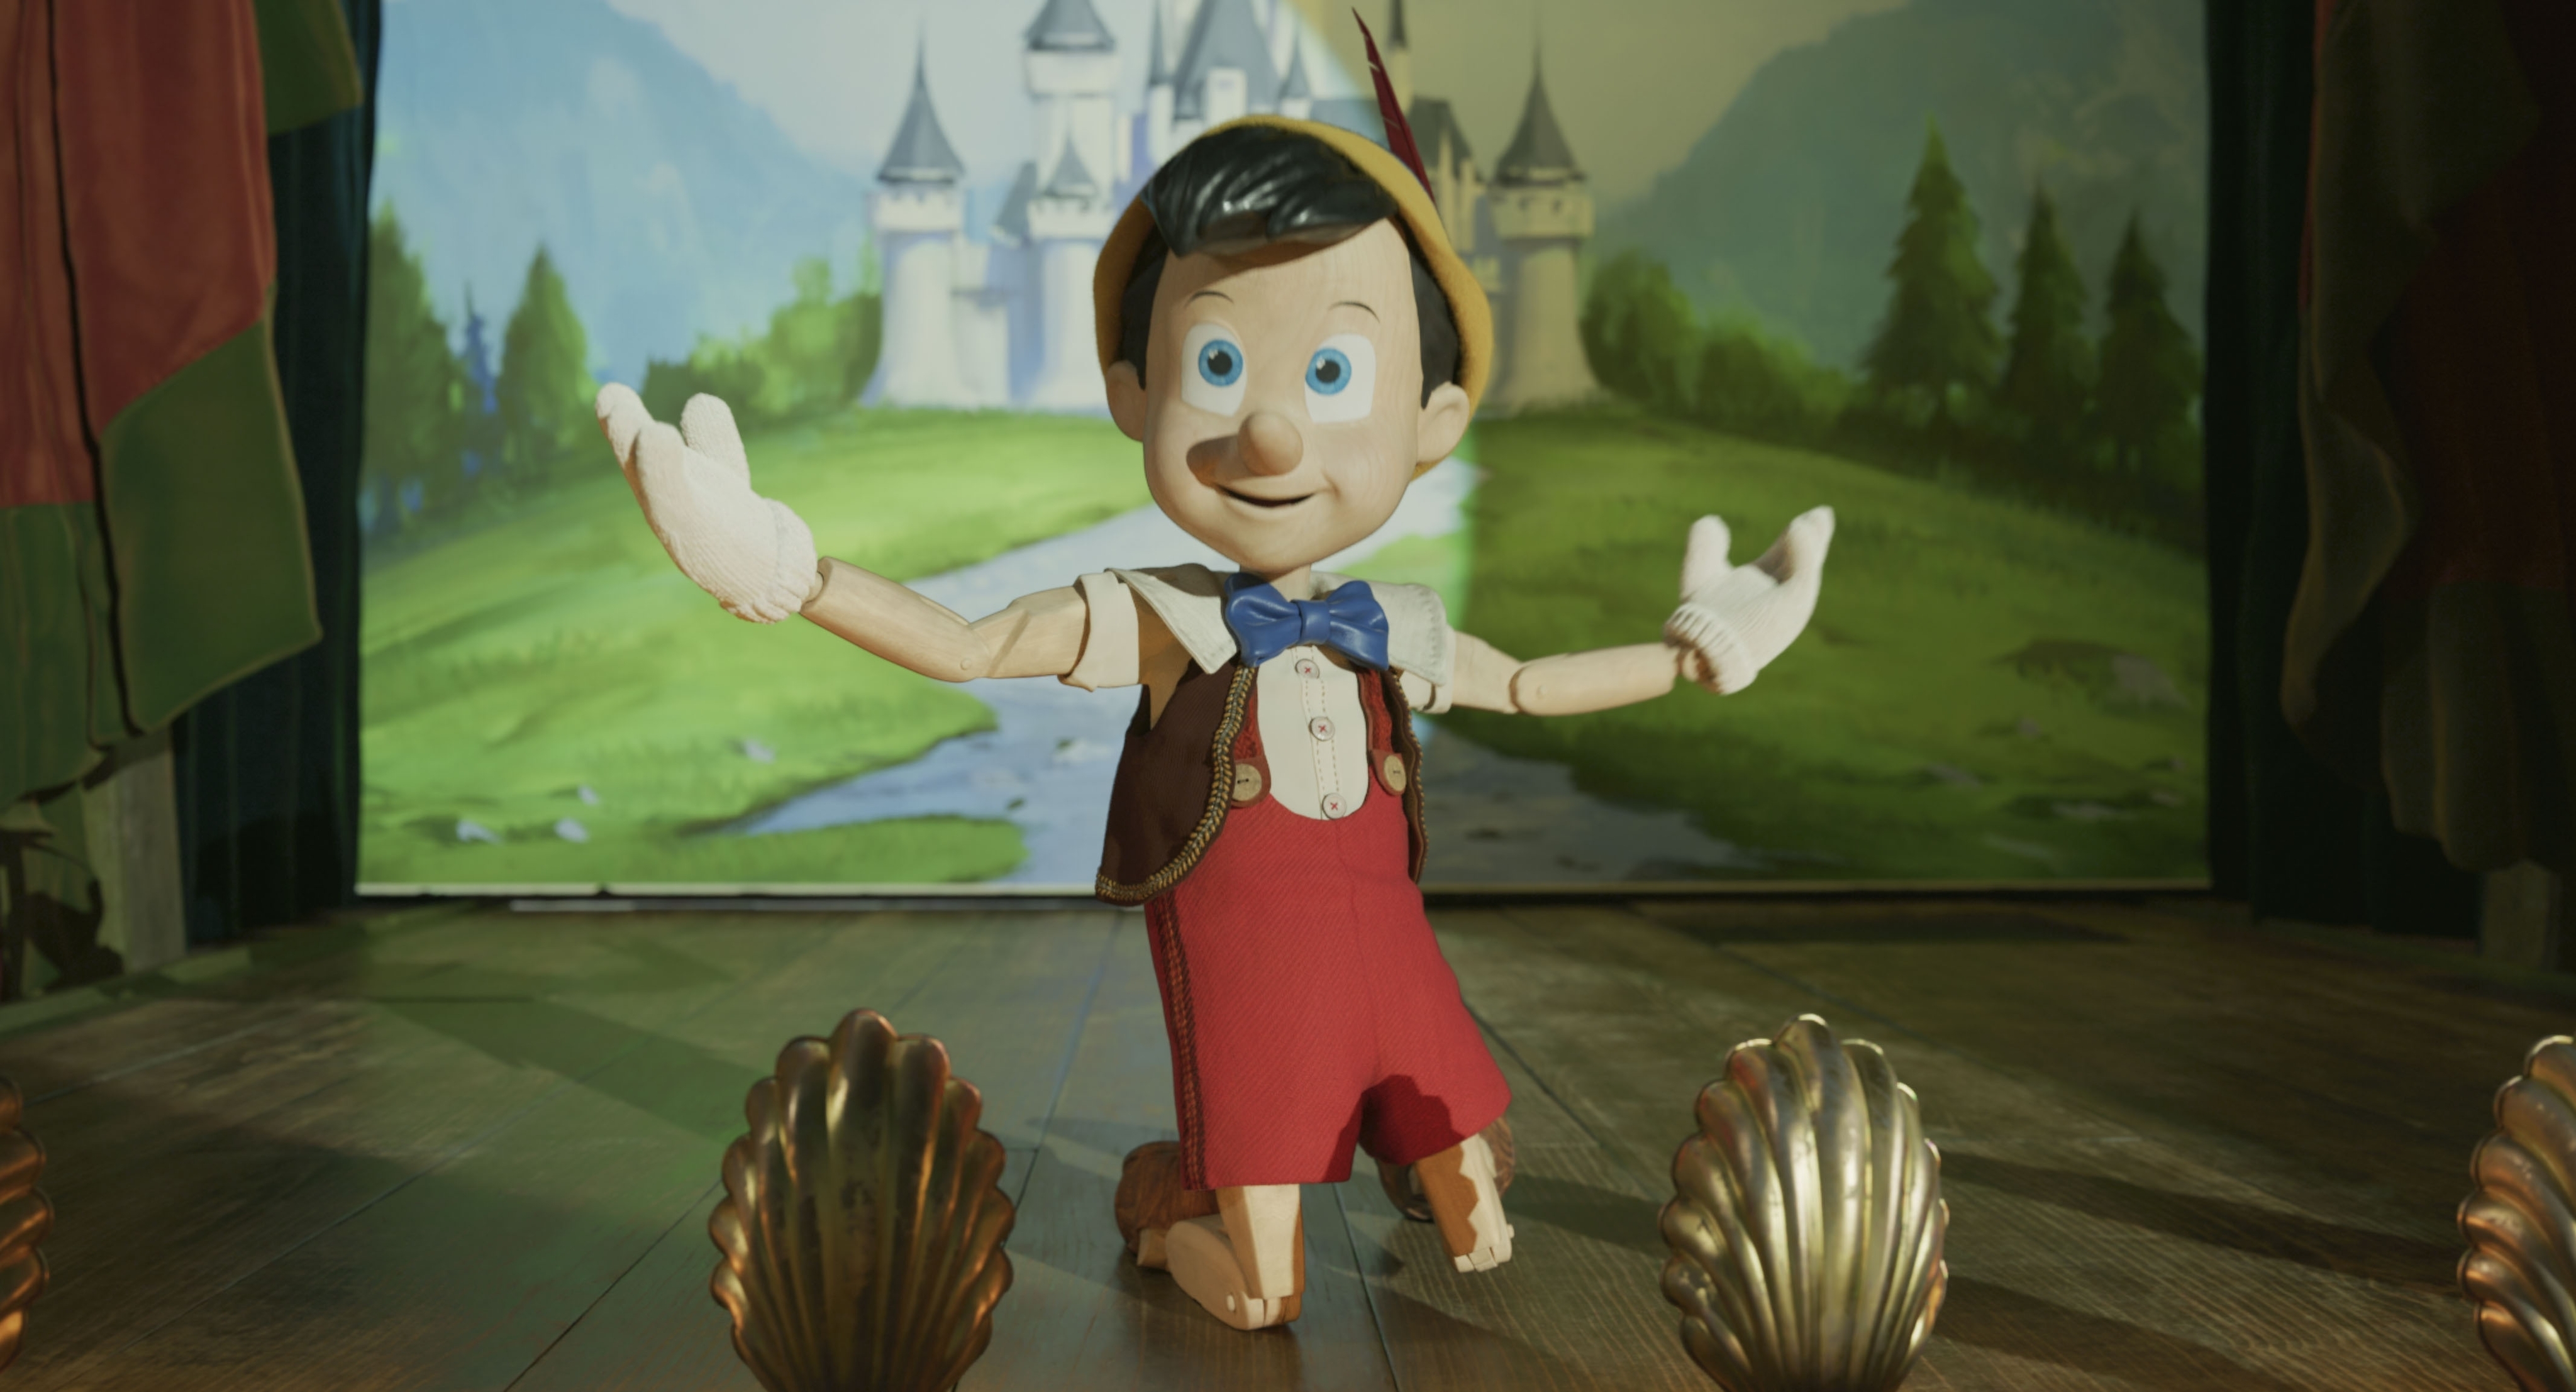 ‘Pinocchio’ Review: Got No Strings But Filled with Cringe